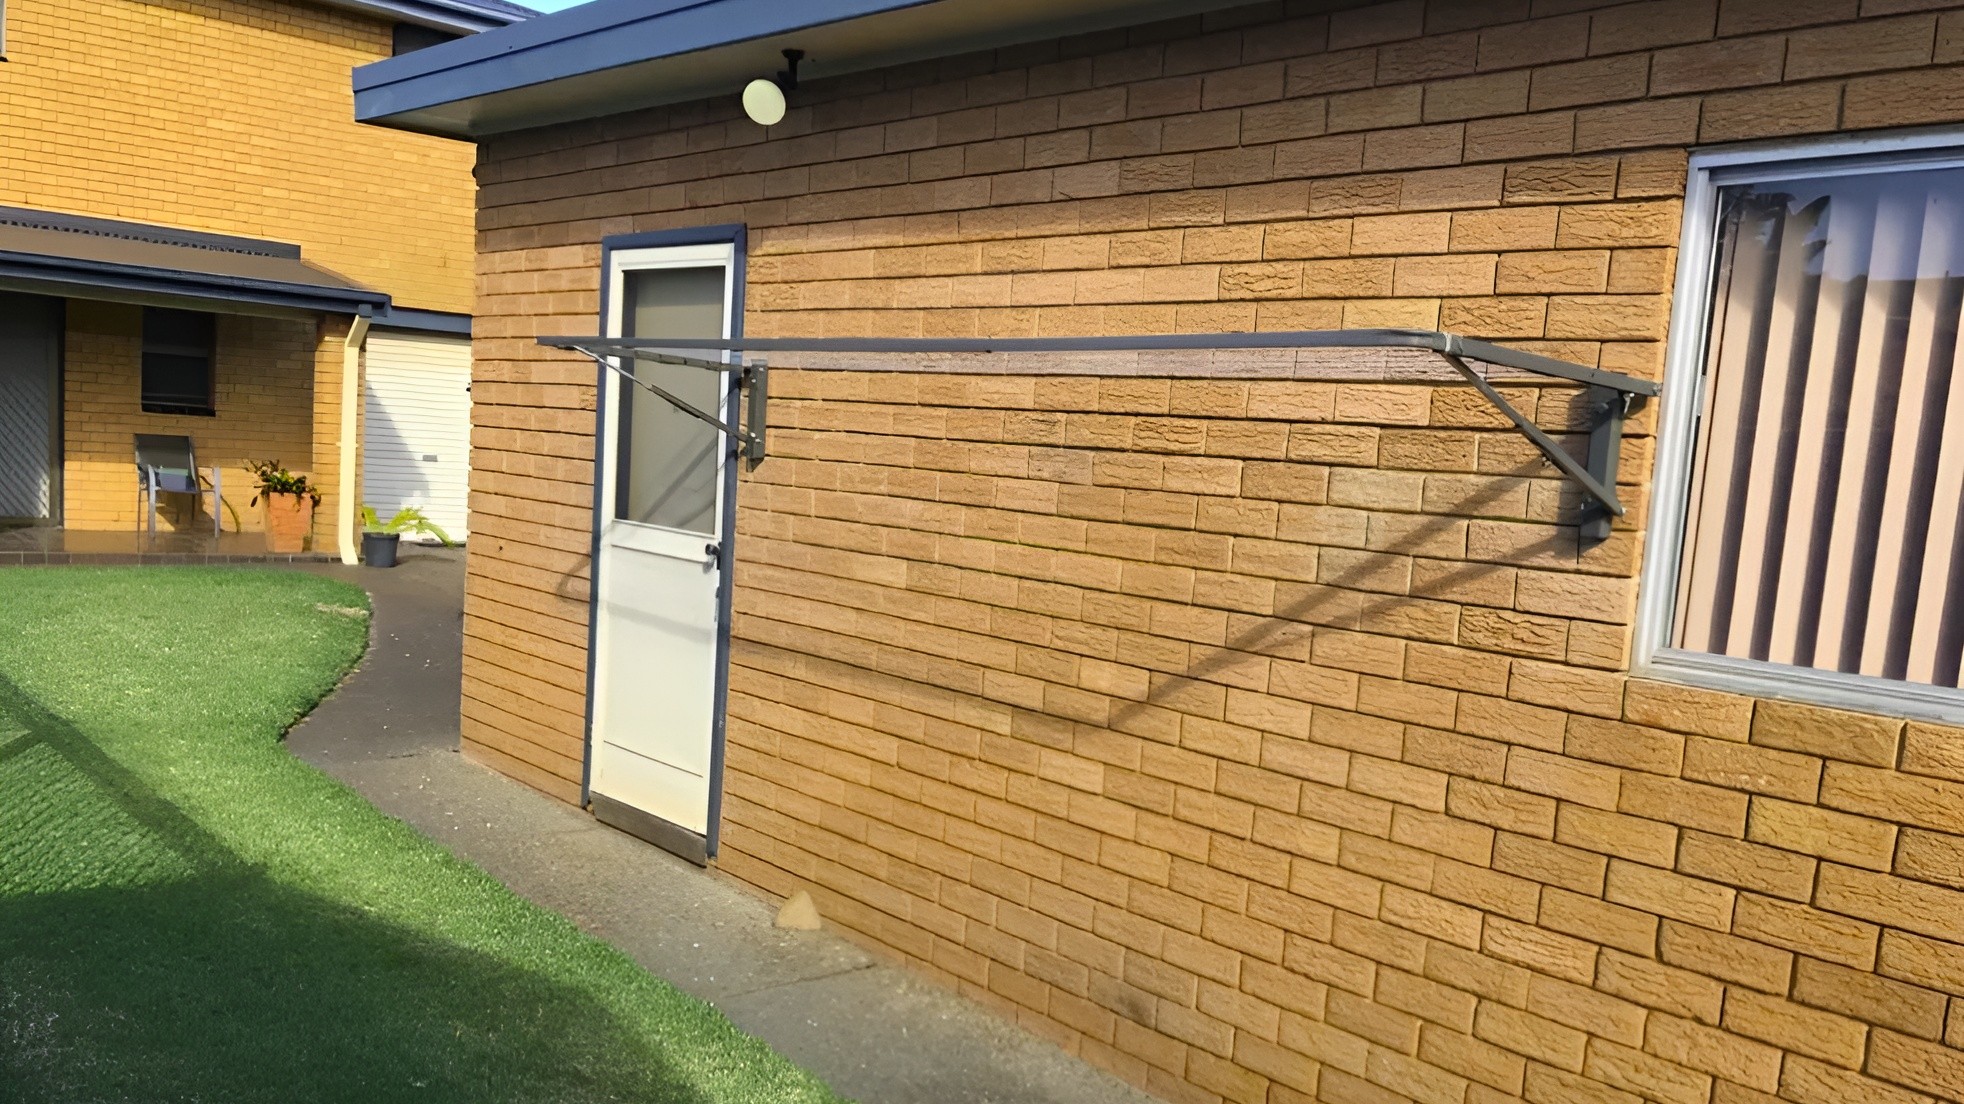 Heavy Duty Wall Mounted Washing Line Customising Your Drying Space: Tailored Washing Lines